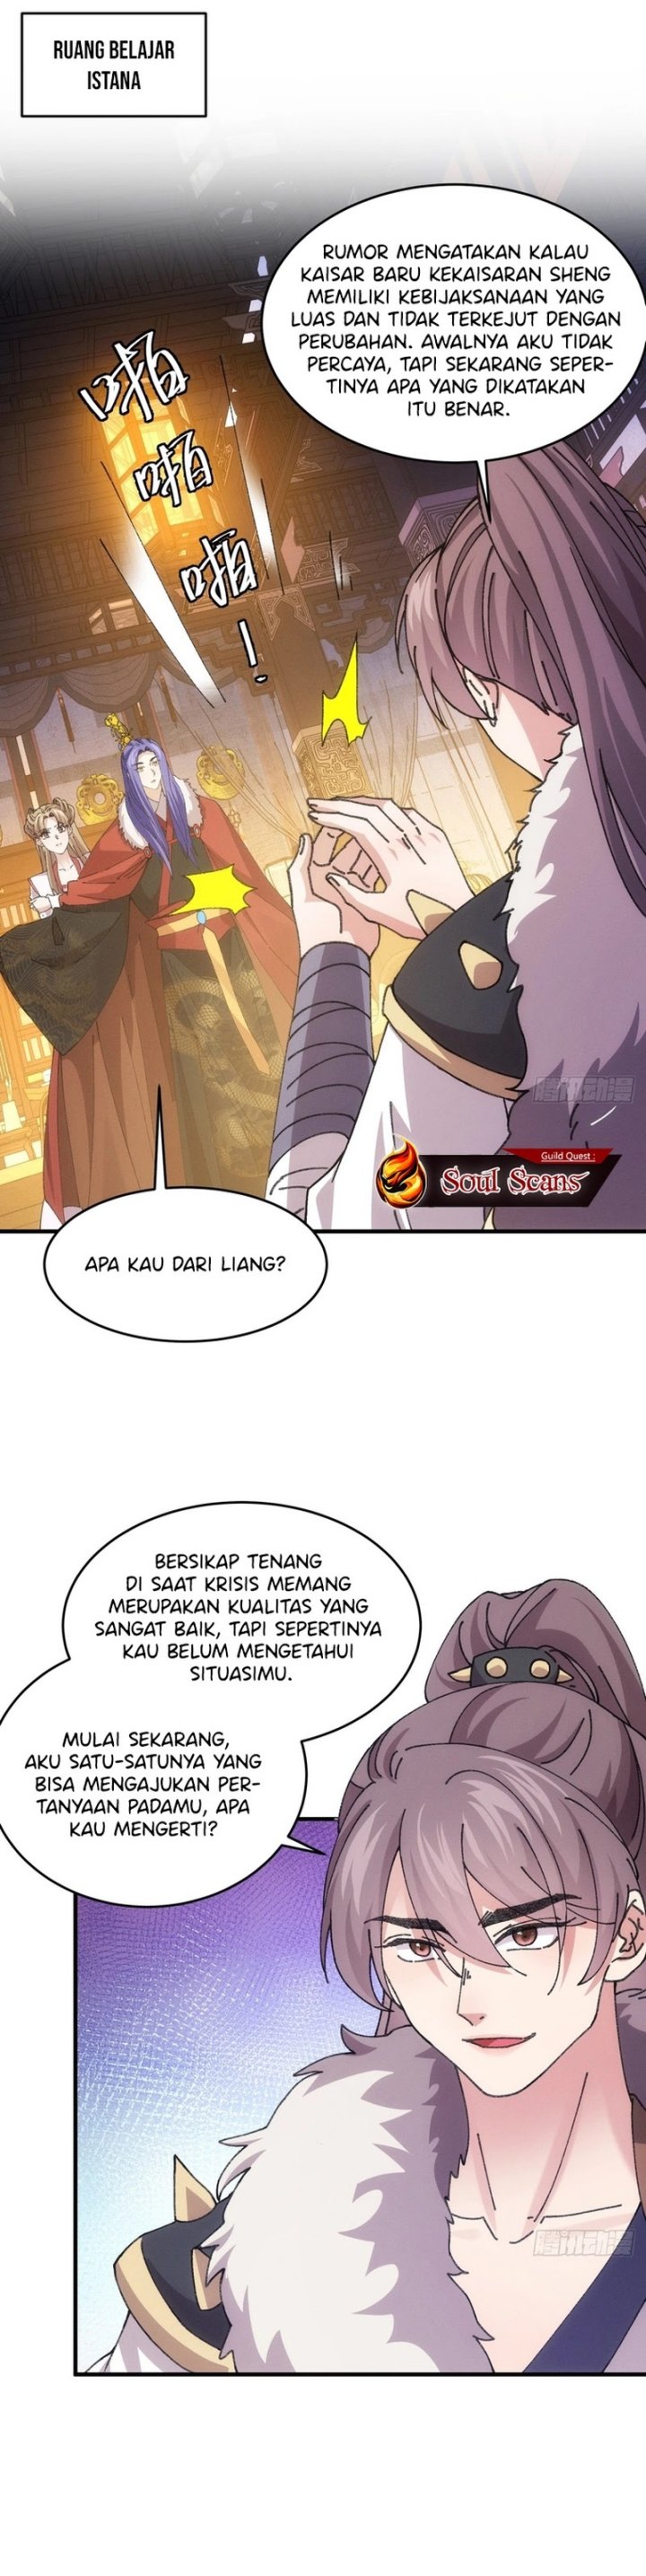 Dilarang COPAS - situs resmi www.mangacanblog.com - Komik i just dont play the card according to the routine 193 - chapter 193 194 Indonesia i just dont play the card according to the routine 193 - chapter 193 Terbaru 1|Baca Manga Komik Indonesia|Mangacan